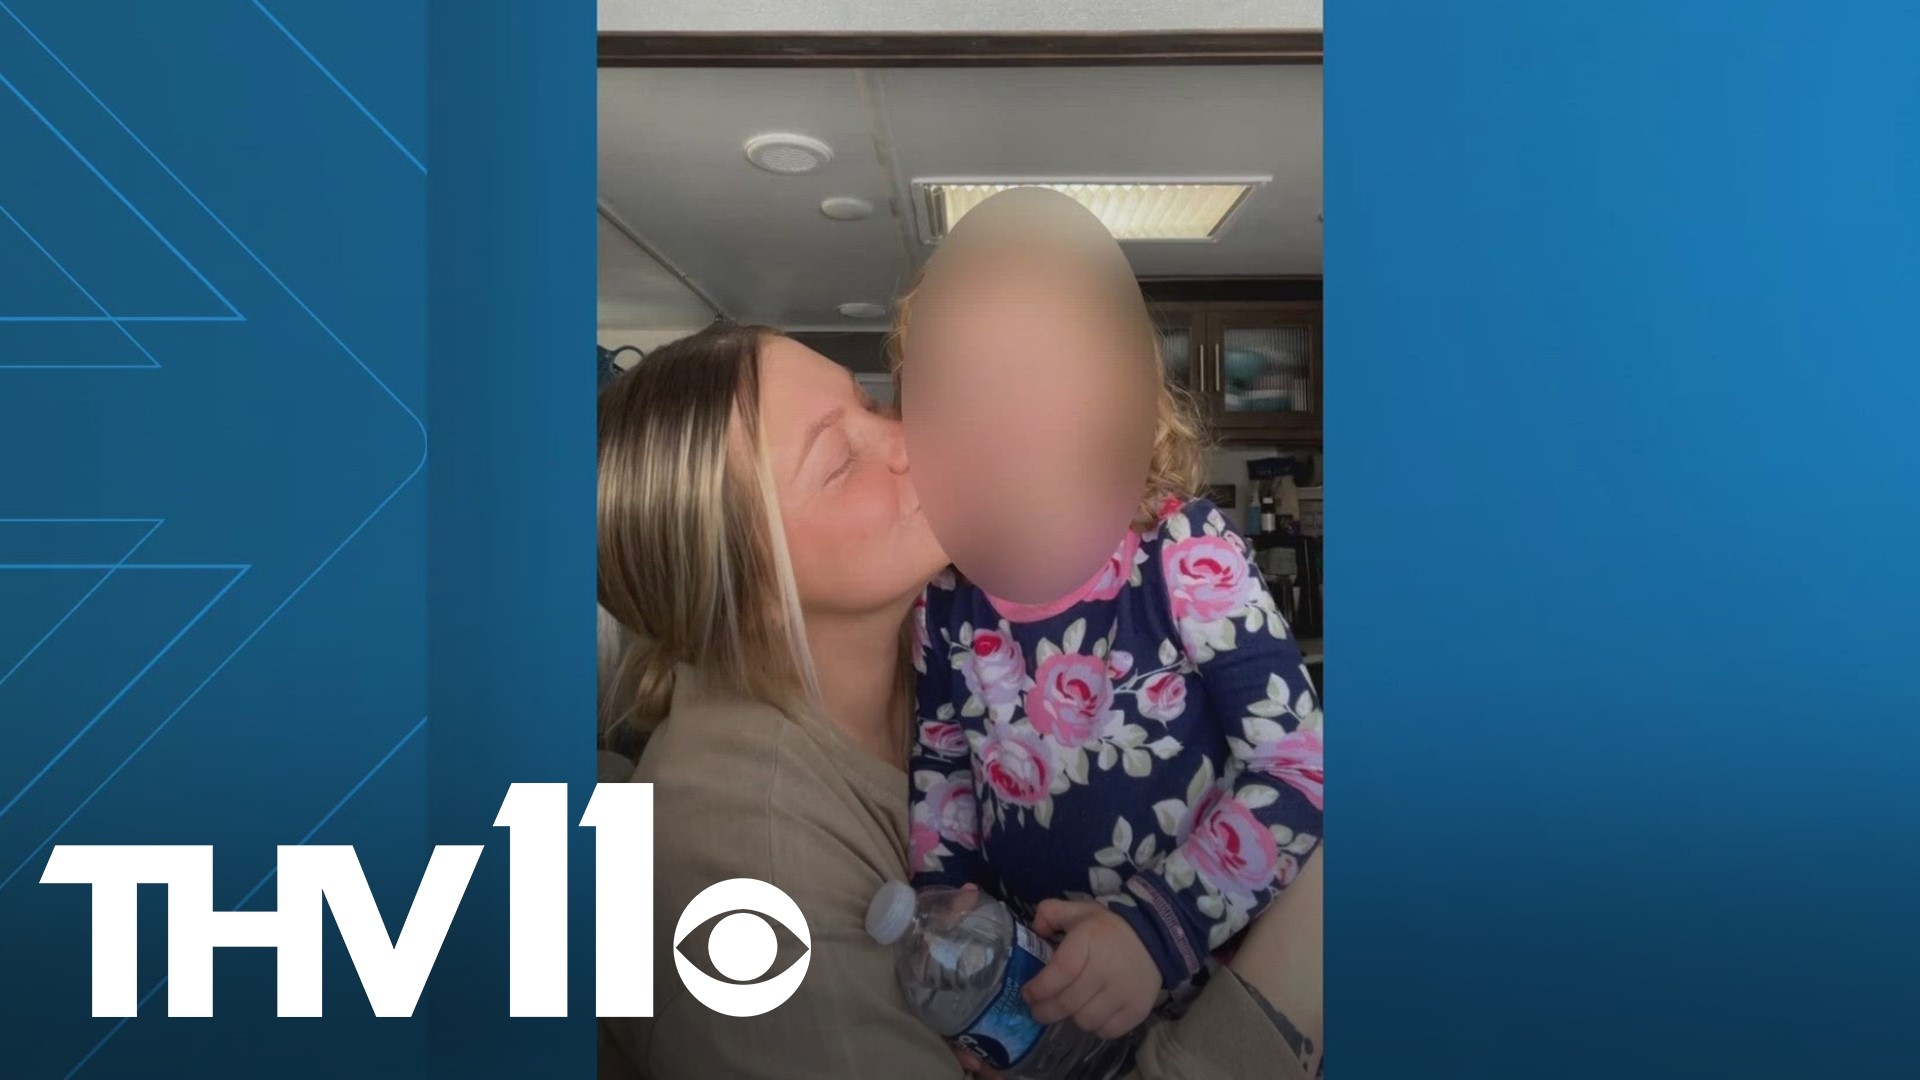 A mom in Sherwood is recovering from a traumatic experience after she said a man tried to take her 2-year-old daughter in a Walmart parking lot.